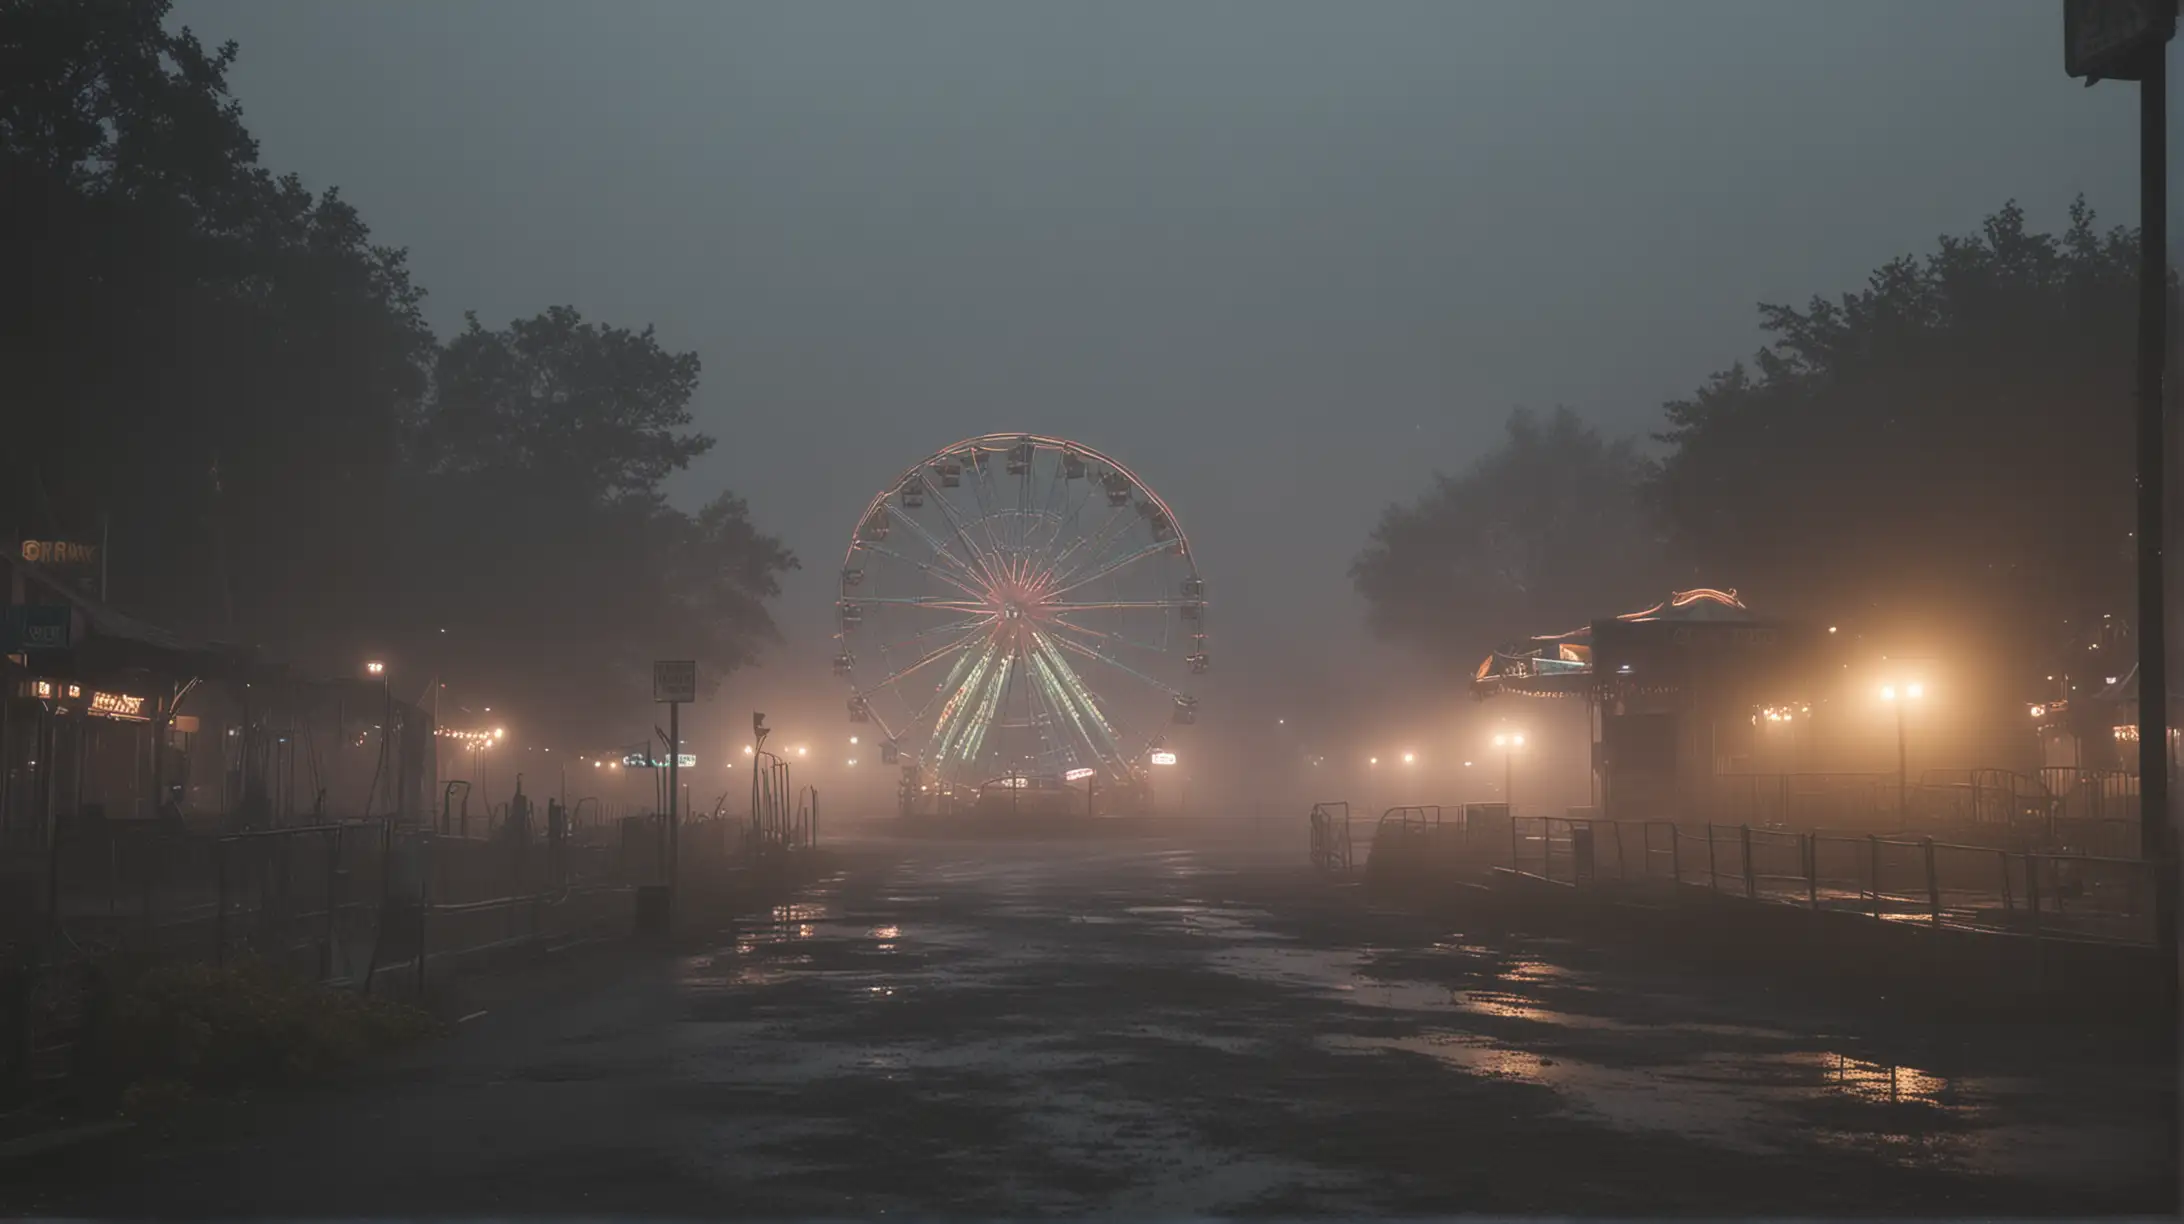 Desolate Abandoned Theme Park with Eerie Atmosphere